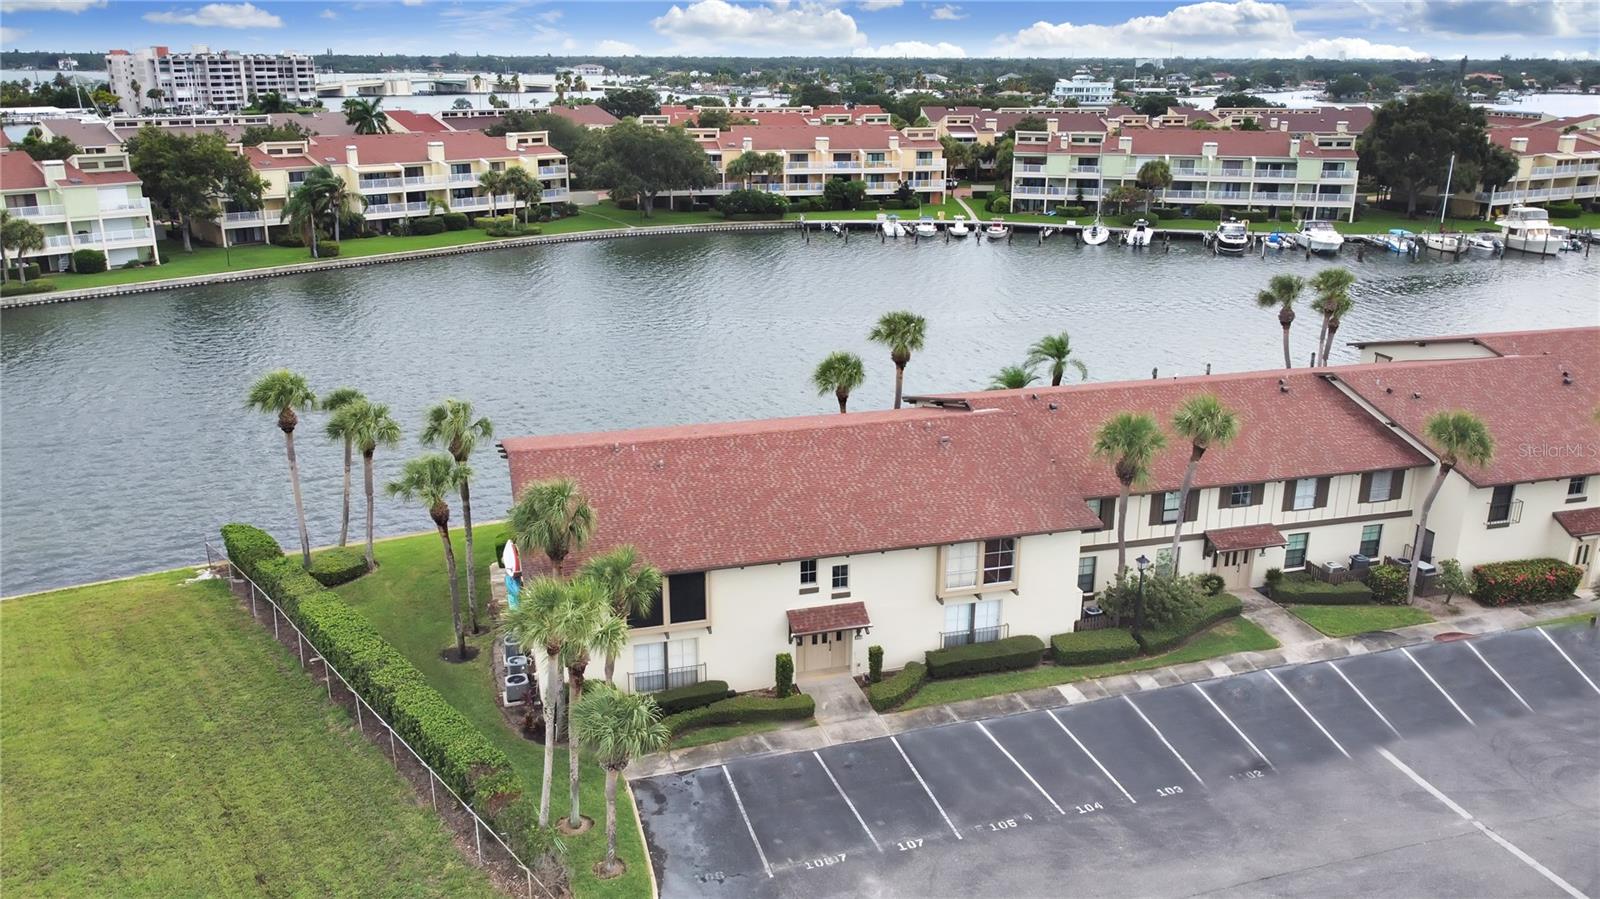 All units abut the Intracoastal waterway! Just walk out your back door for amazing views!